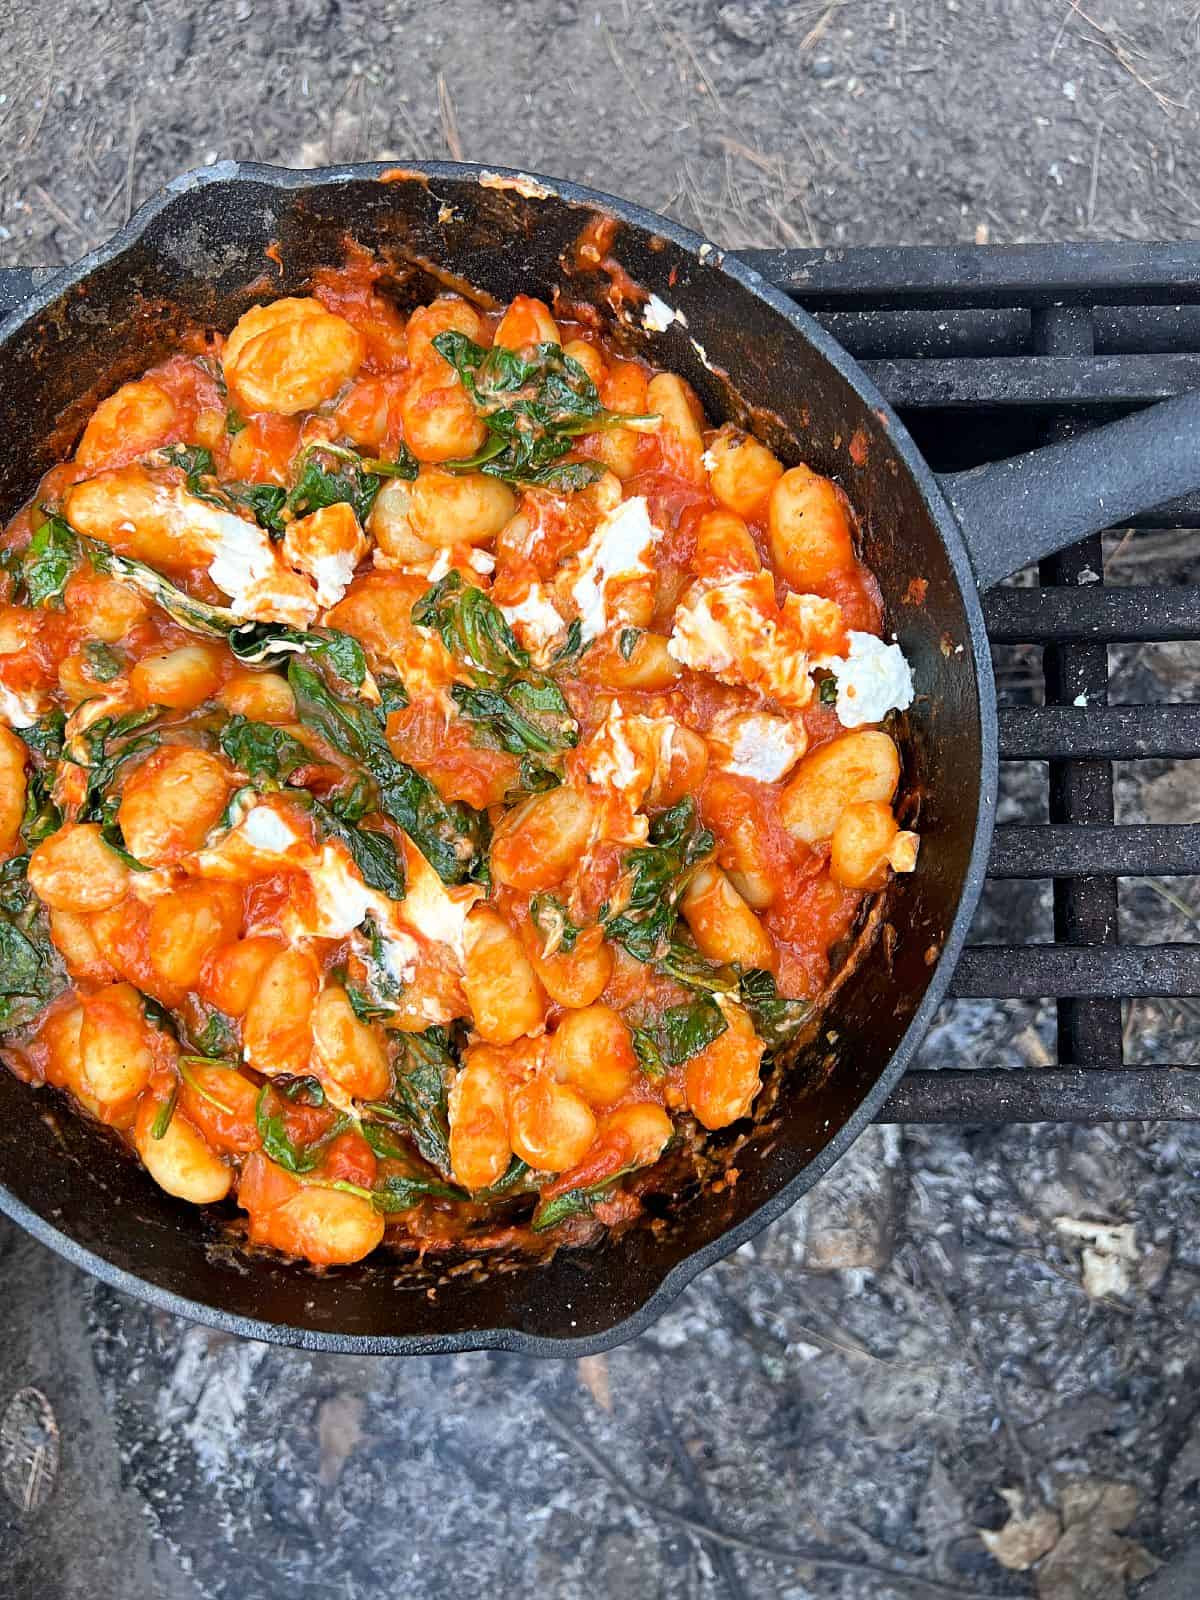 An image of cooked Smoky Gnocchi in a cast iron pan on a grate over an open fire.